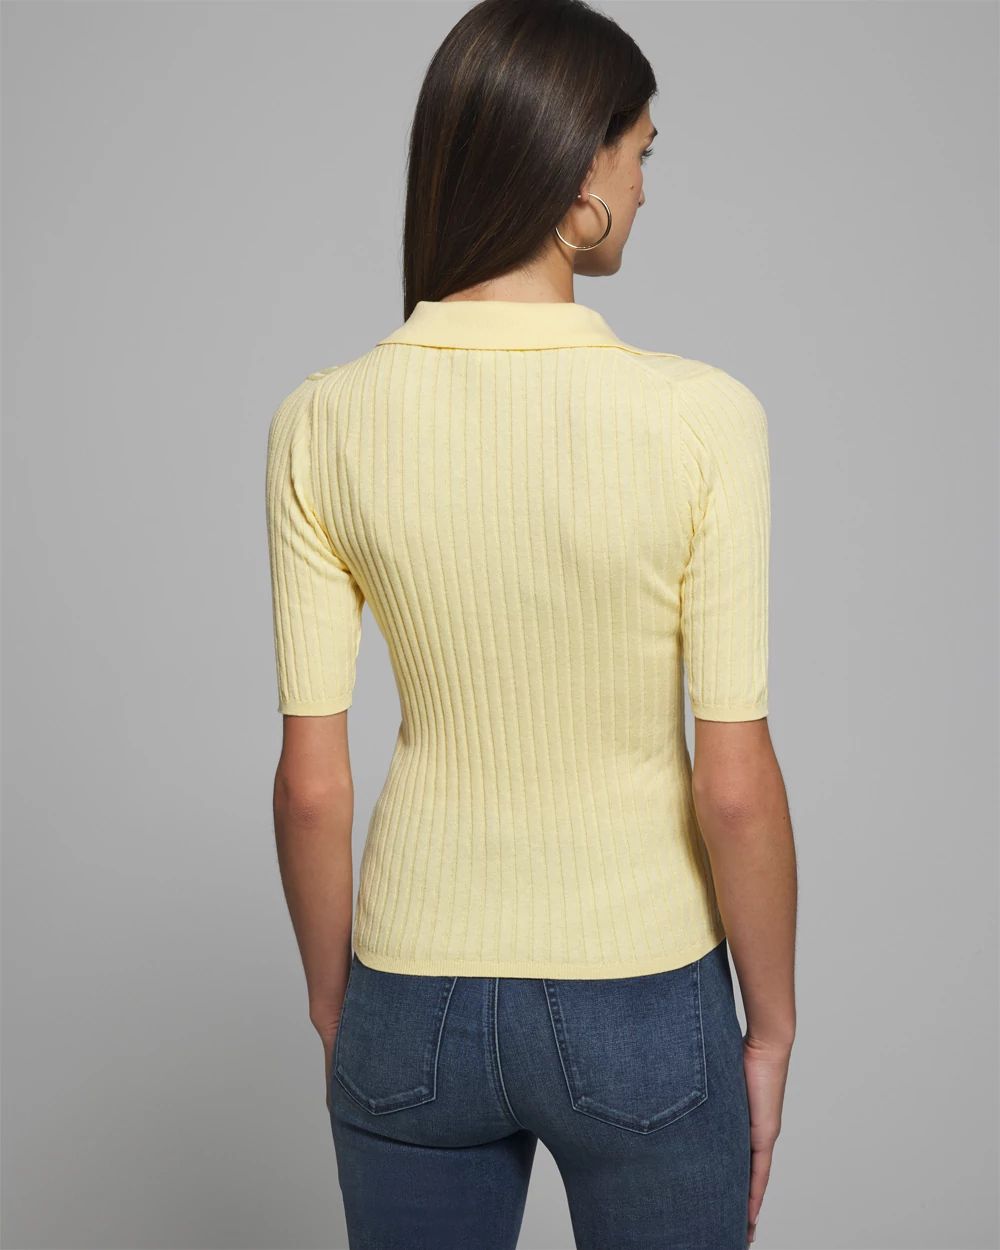 Outlet WHBM Button Front Collar Pullover click to view larger image.